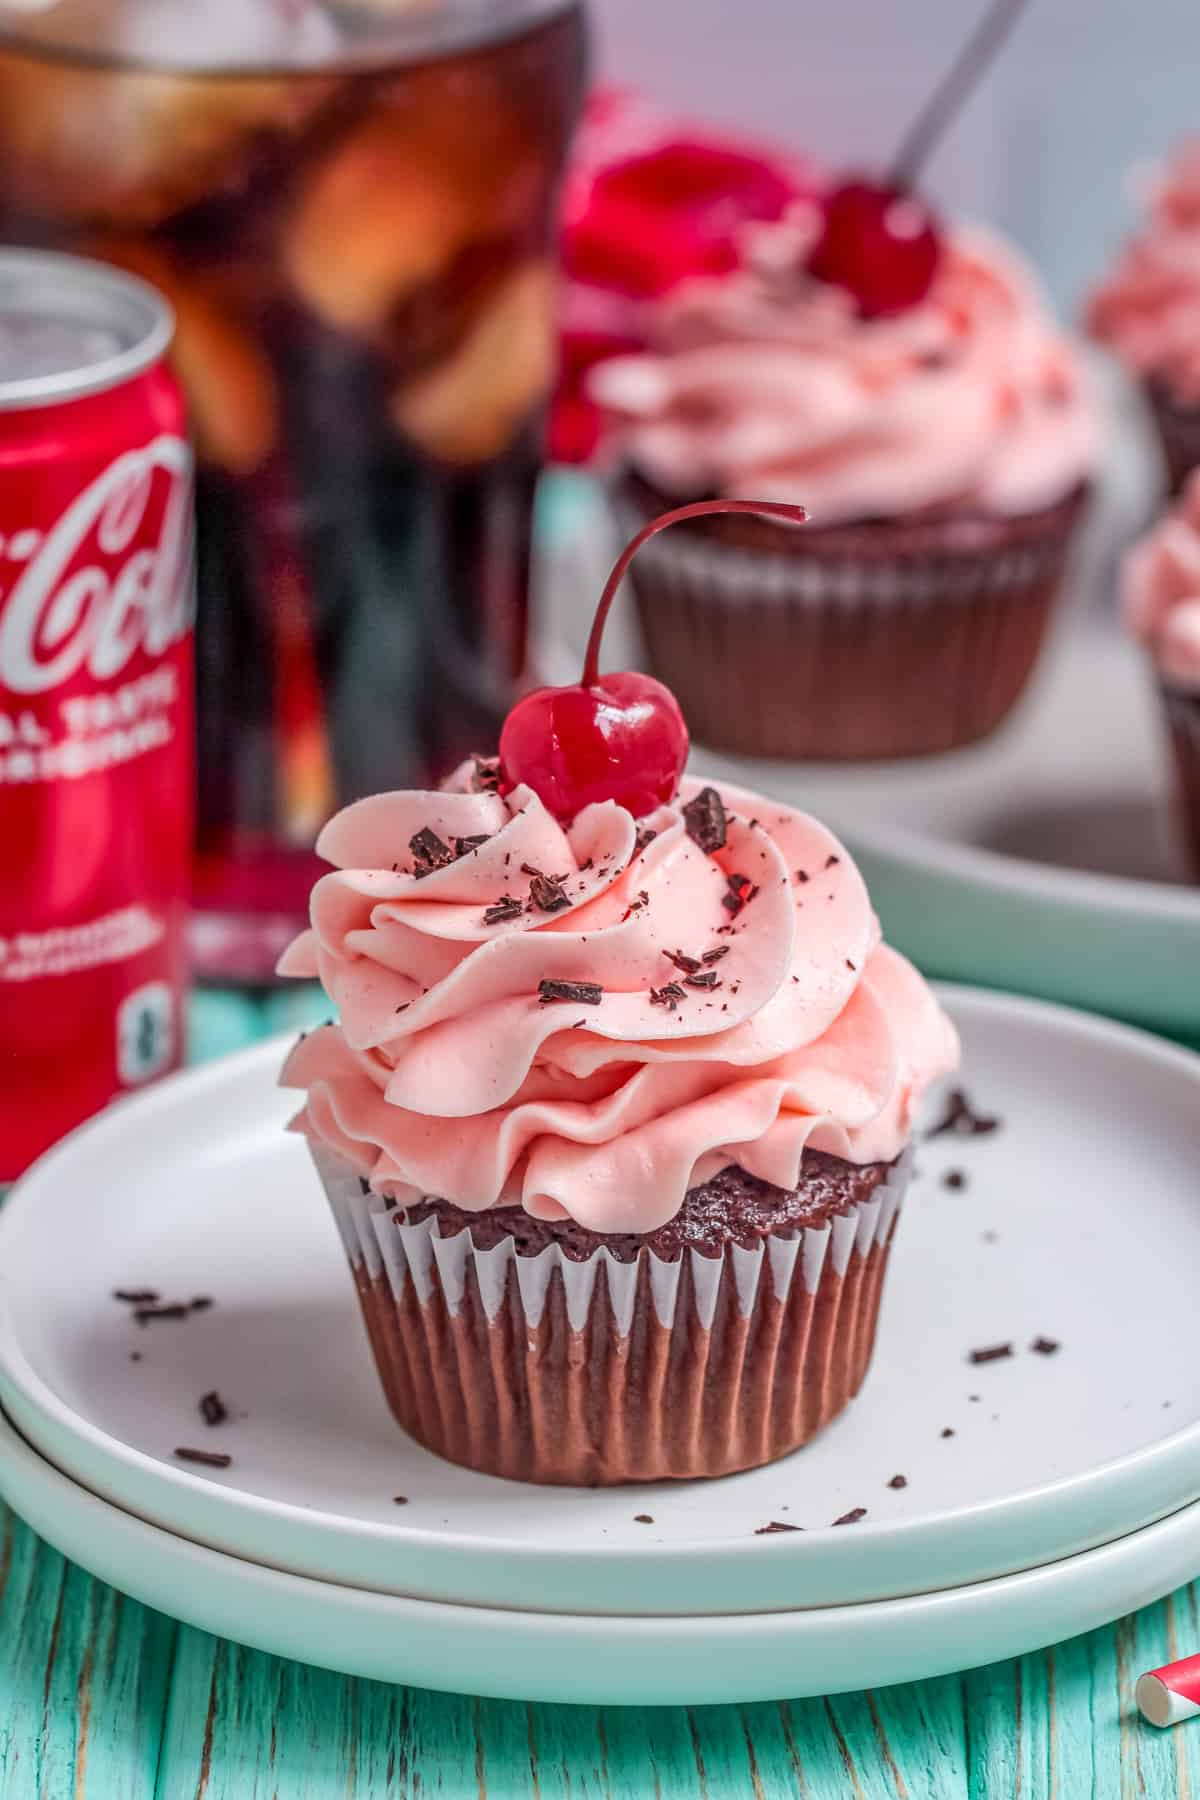 One of the Cherry Coke Cupcakes on white plate frosted and garnished with a cherry and chocolate shavings.